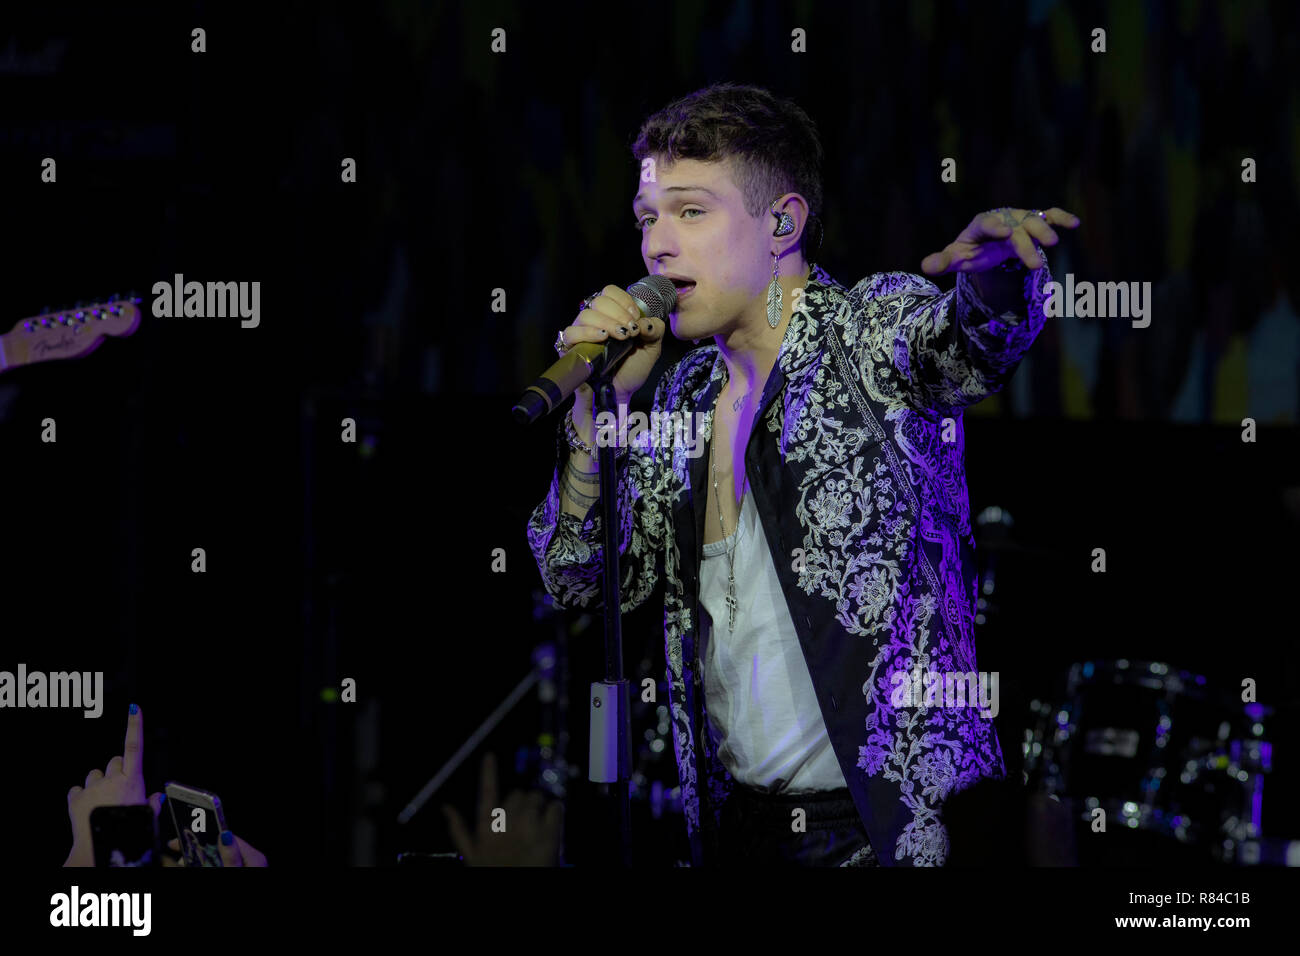 Napoli, Italy. 19th Mar, 2017. Irama is an Italian songwriter, who took part in Amici, performs live at Duel Beat in Napoli with "Giovani per sempre tour". Credit: Francesco Cigliano/Pacific Press/Alamy Live News Stock Photo